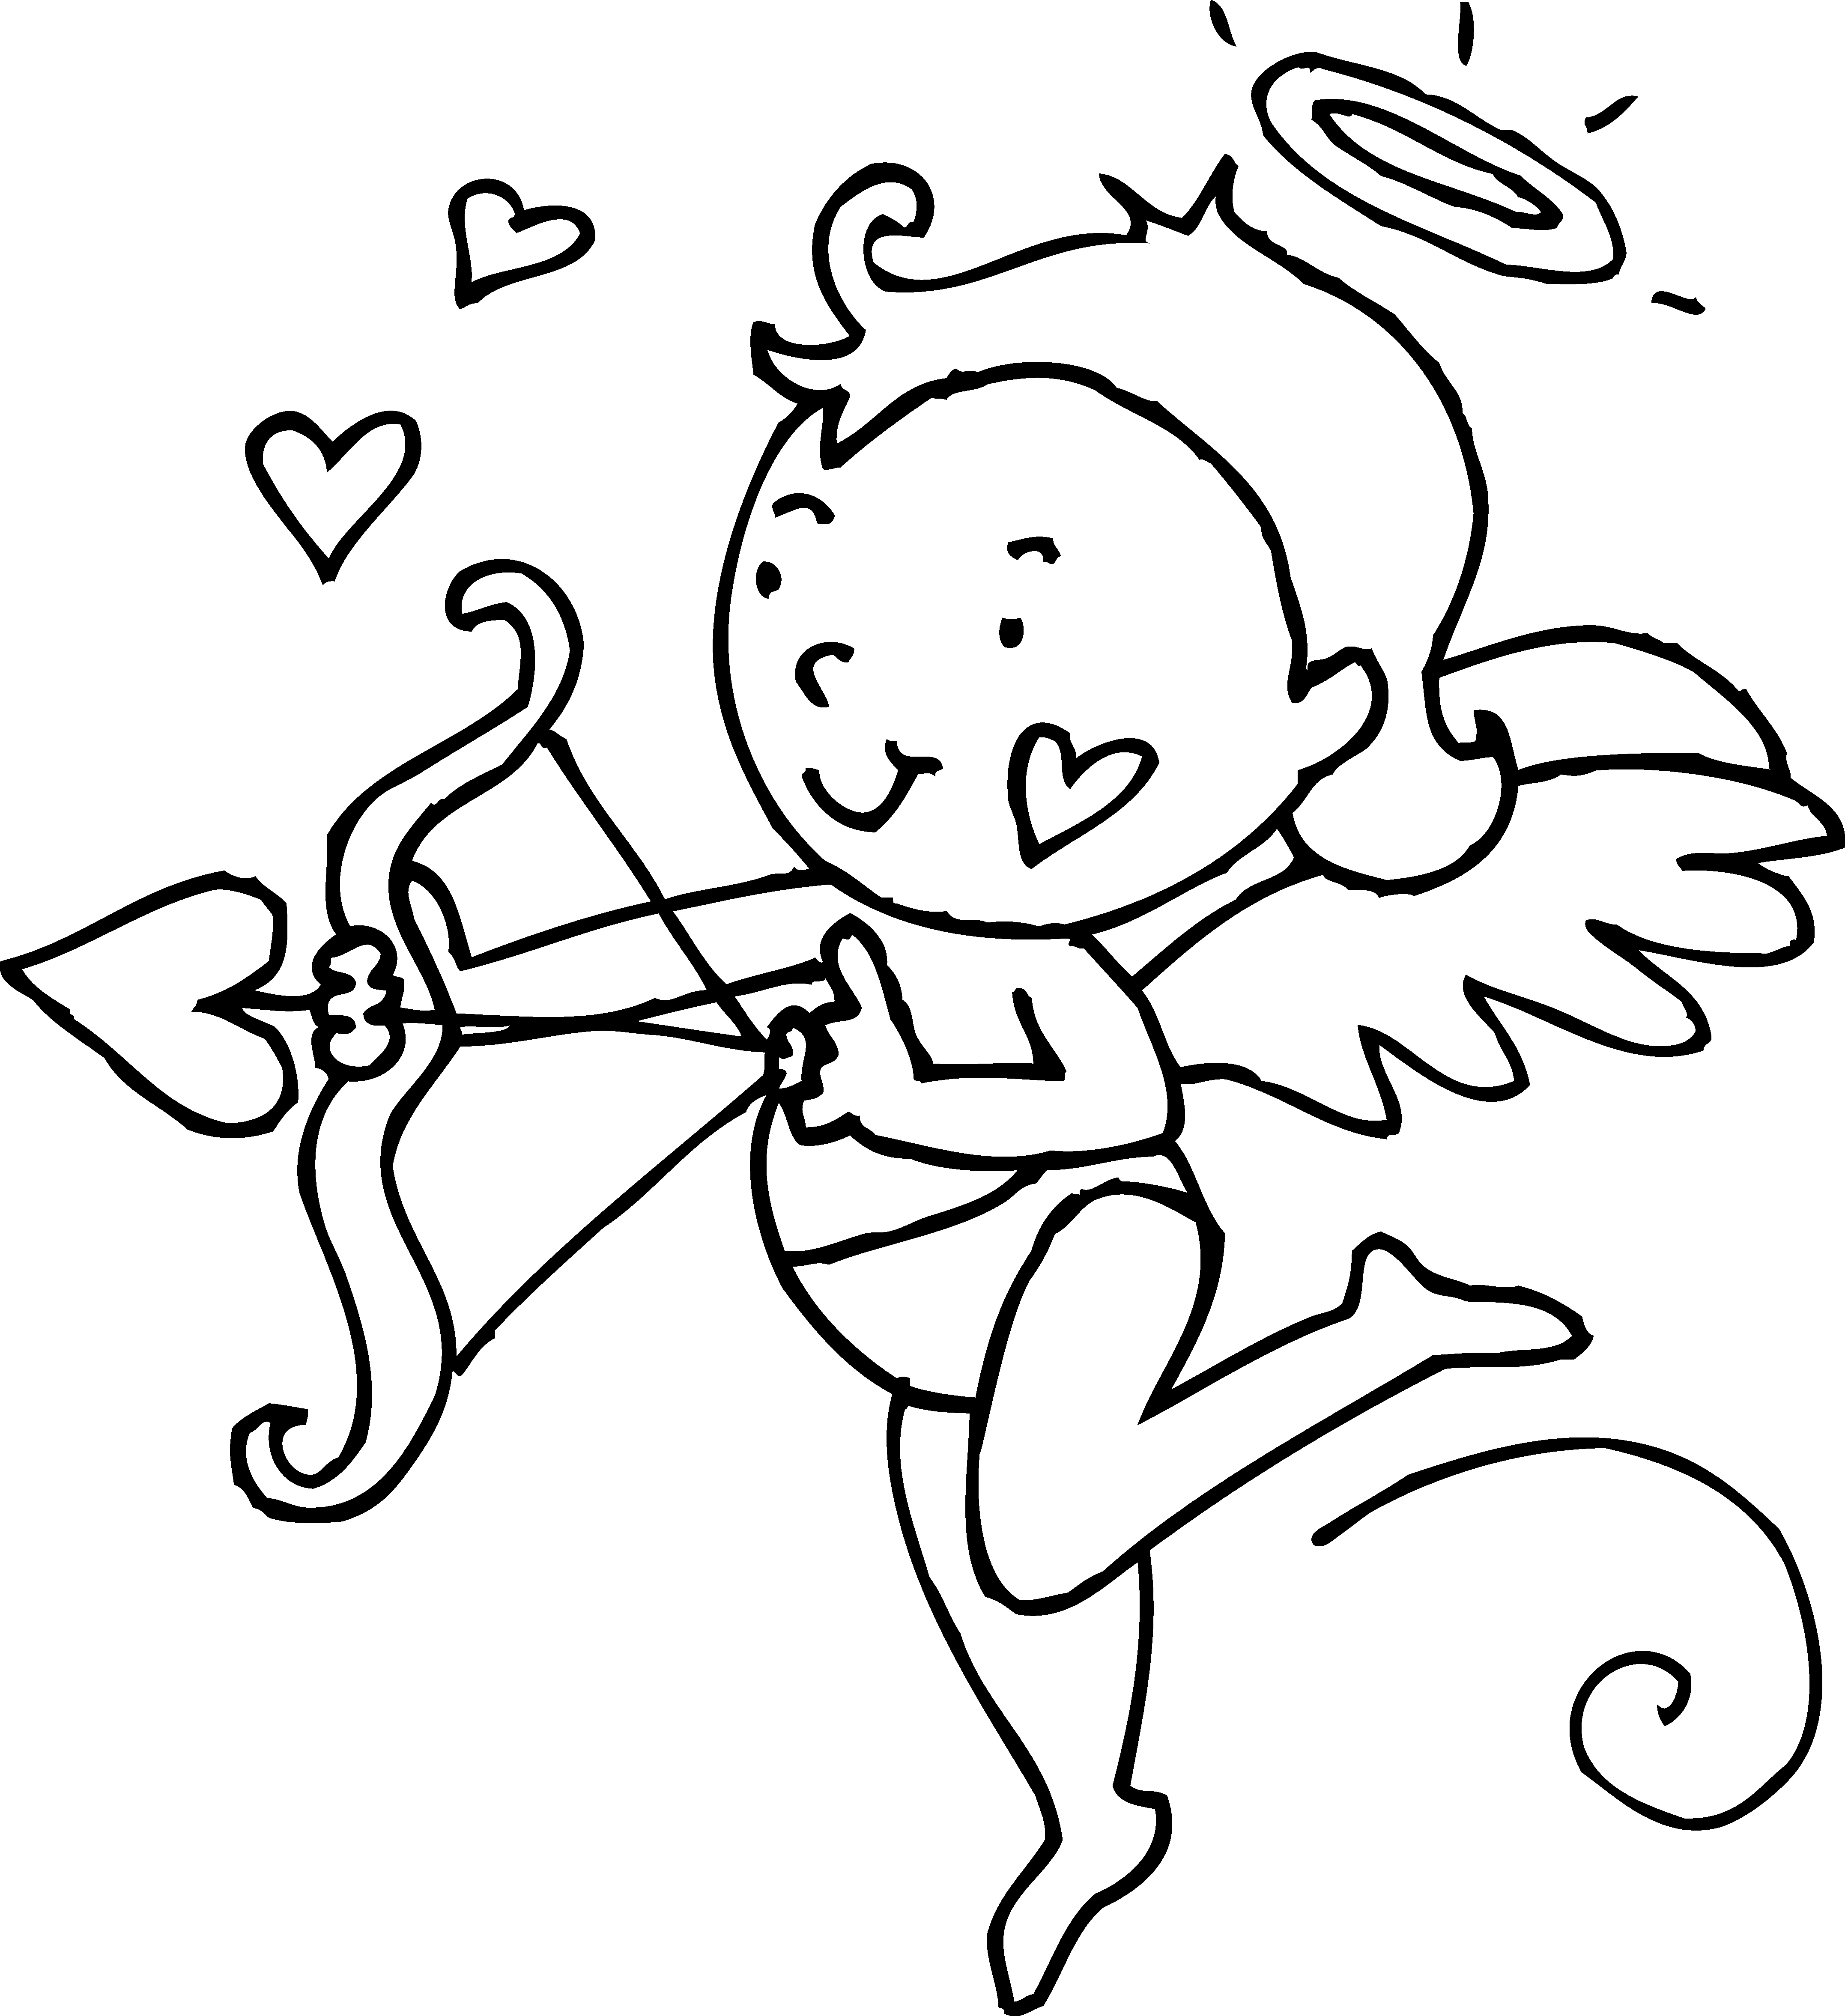 Cupid clipart image